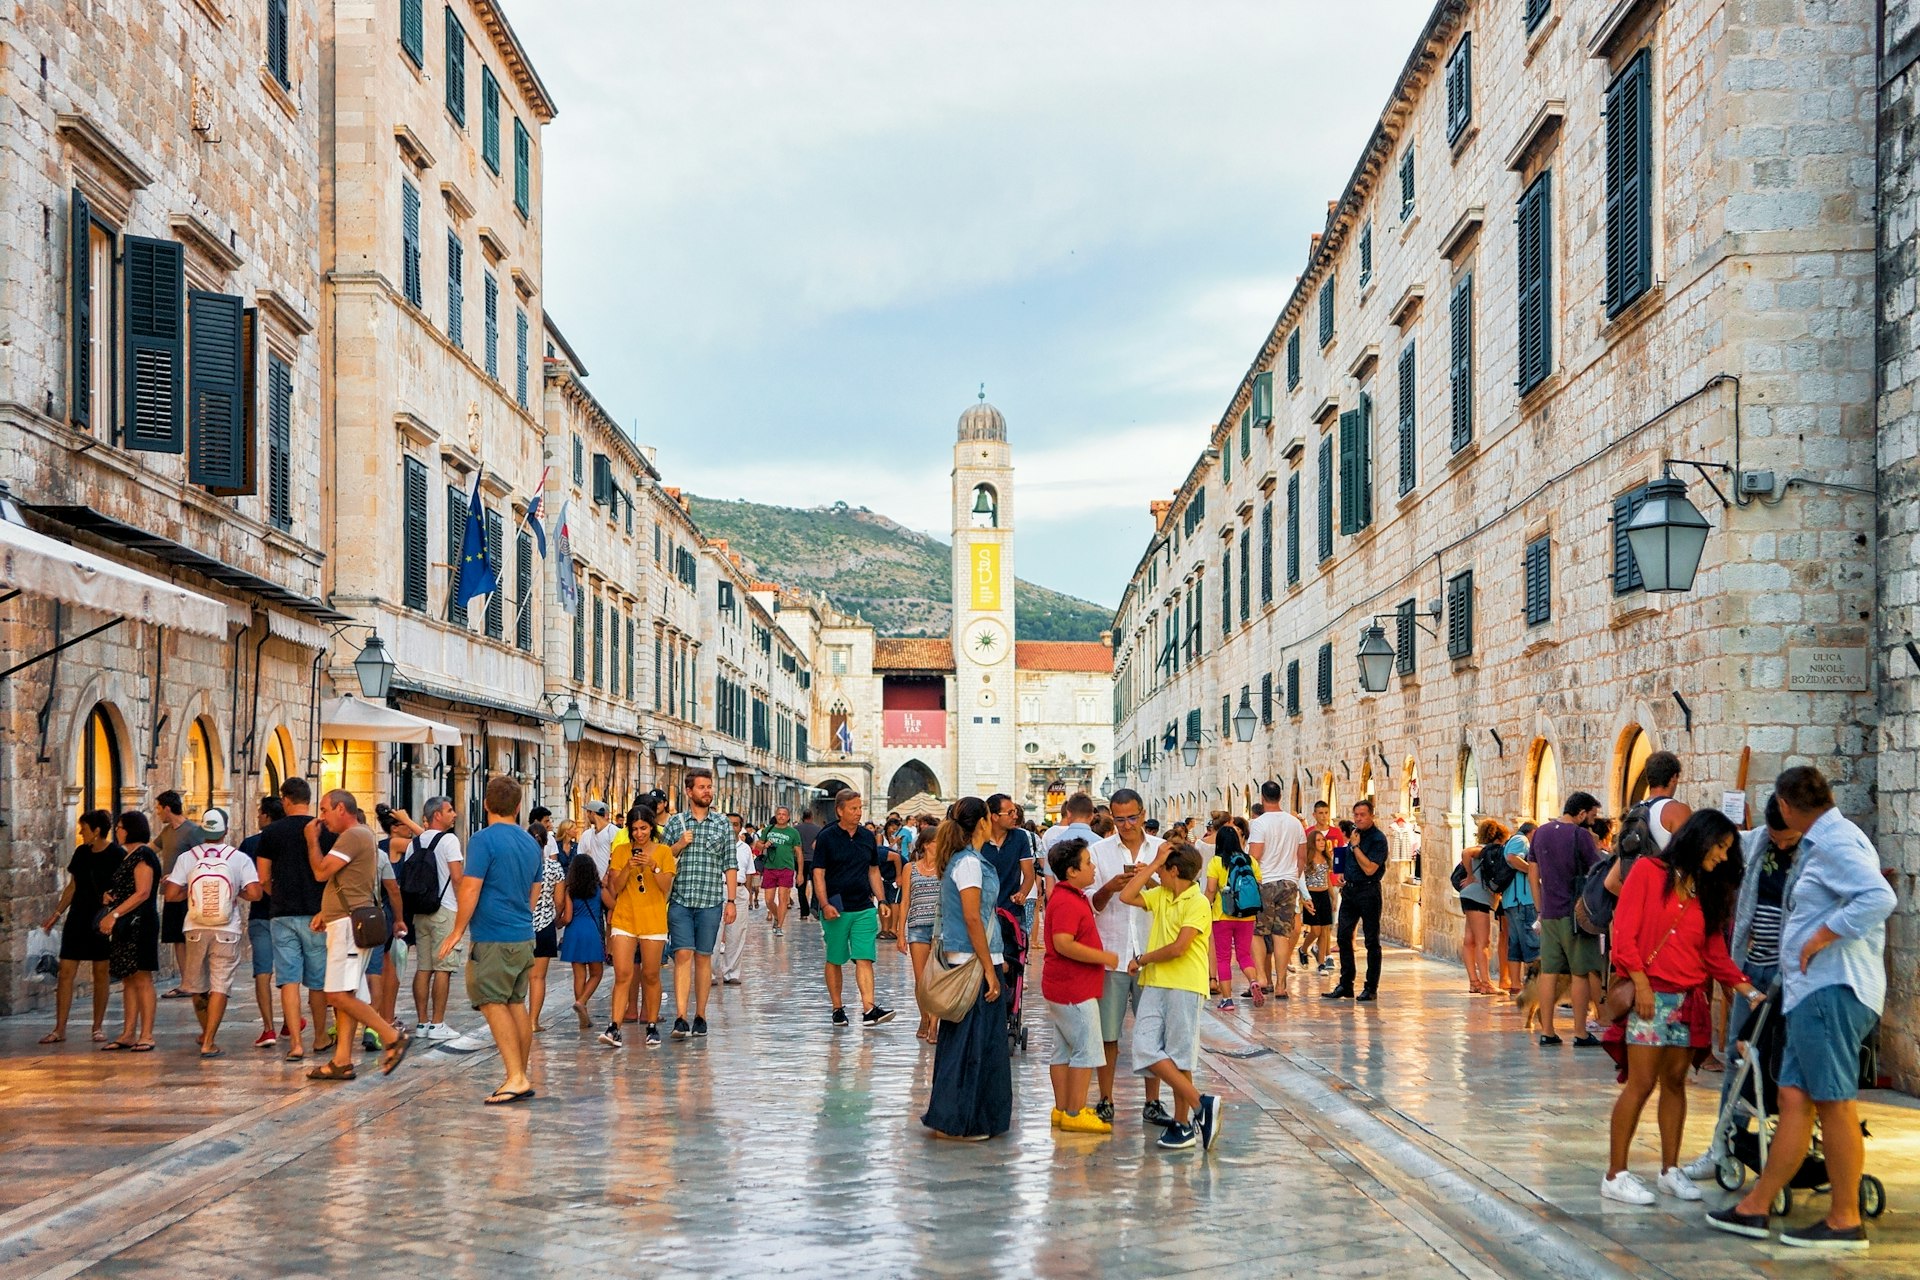 People in the old town of Dubrovnik on marble paths with a large bell tower in the distance